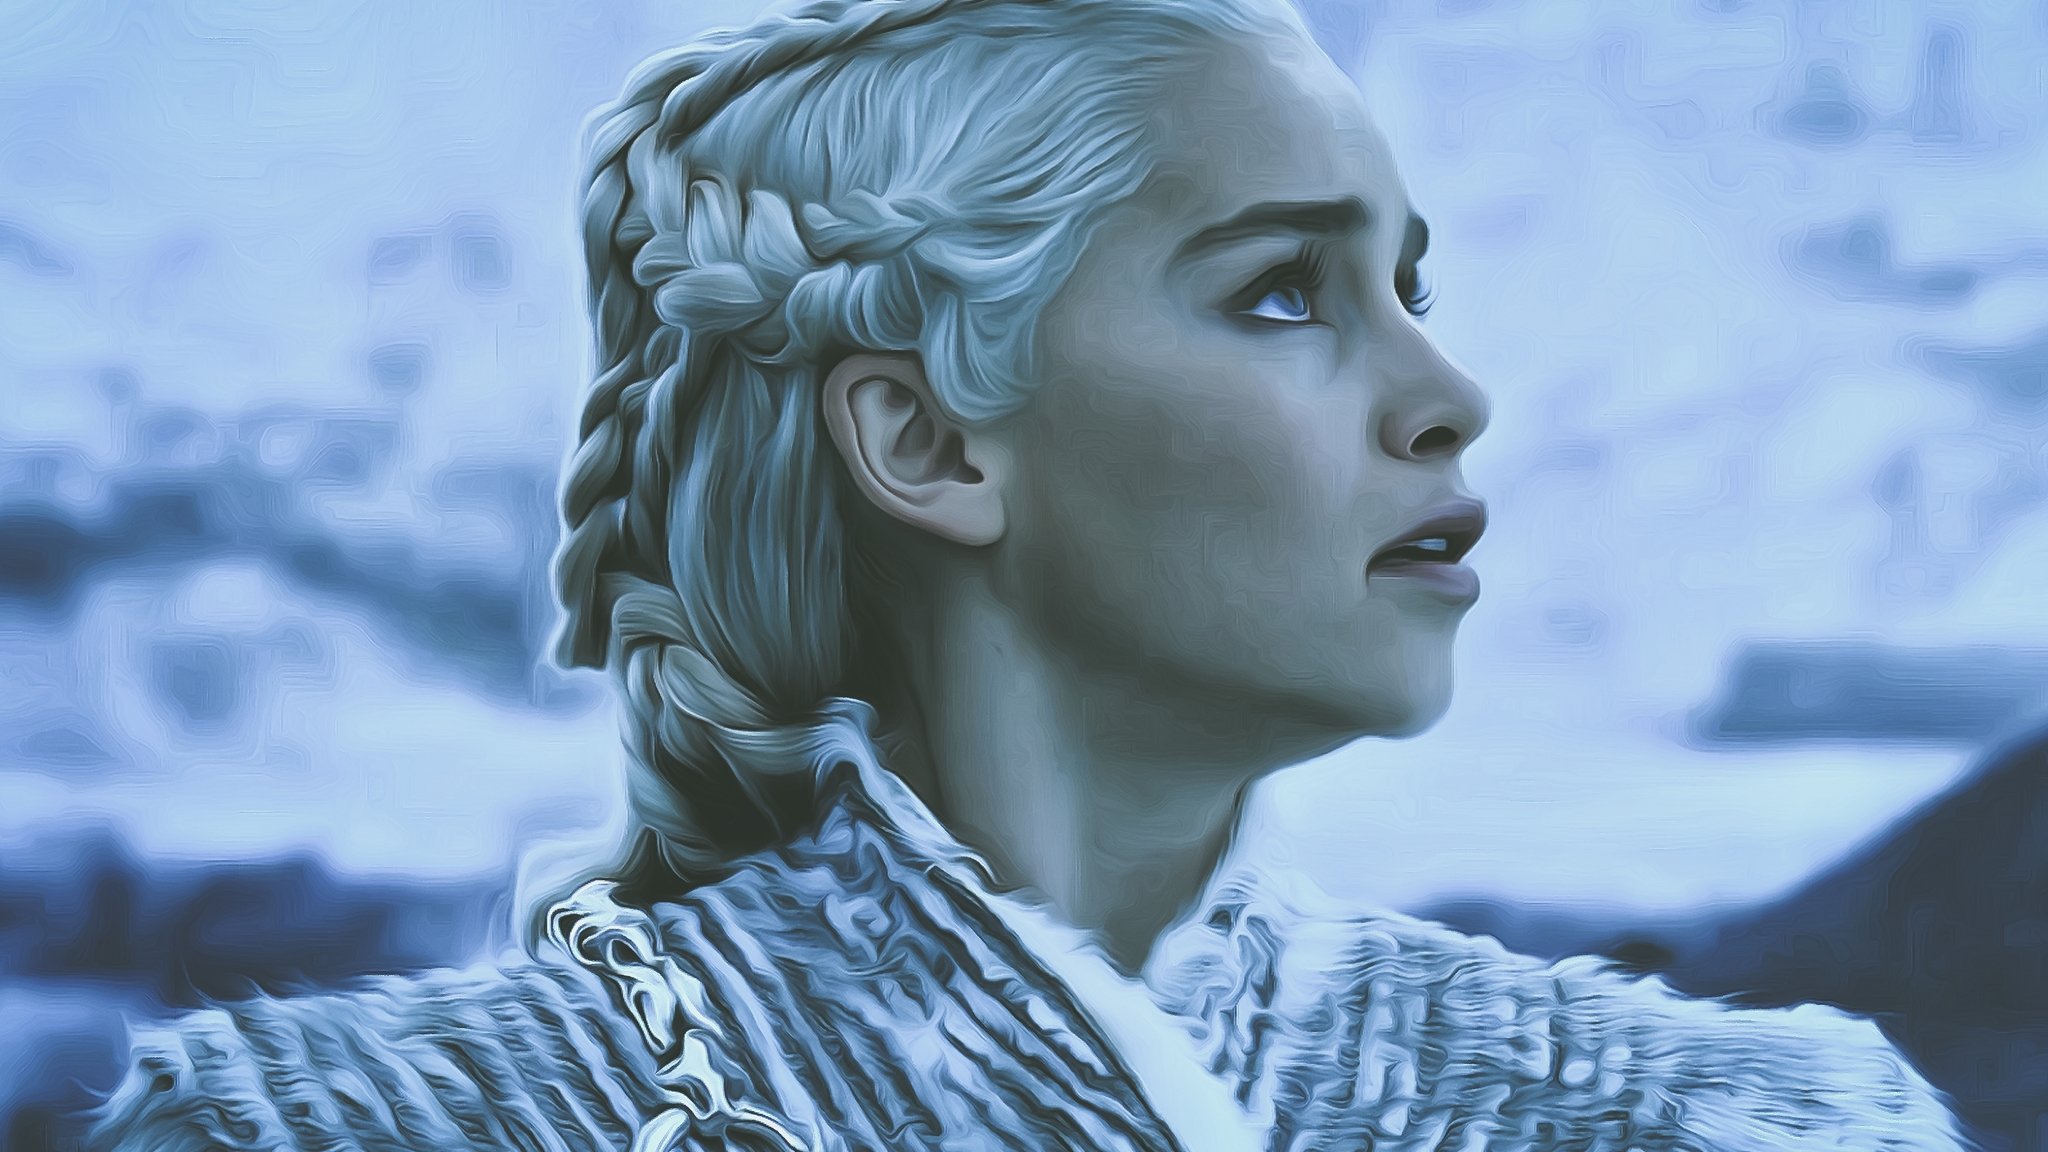 Game Of Thrones Season 7 Hd Wallpapers For Mobile